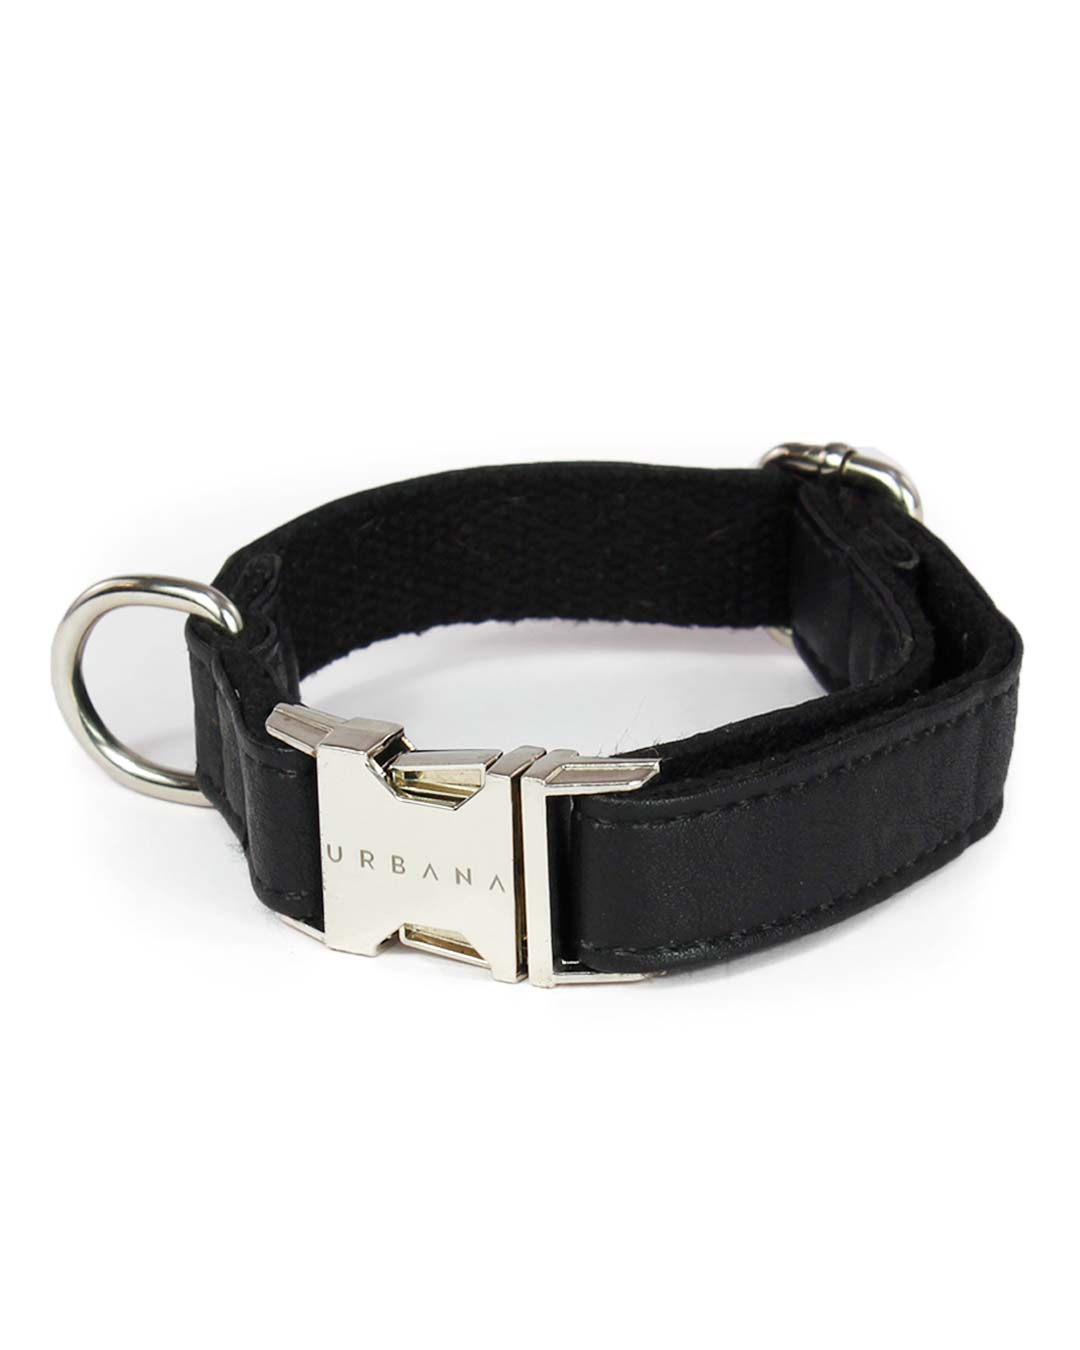 Mademoiselle Chanel Dog Collar  Doggie Couture Shop